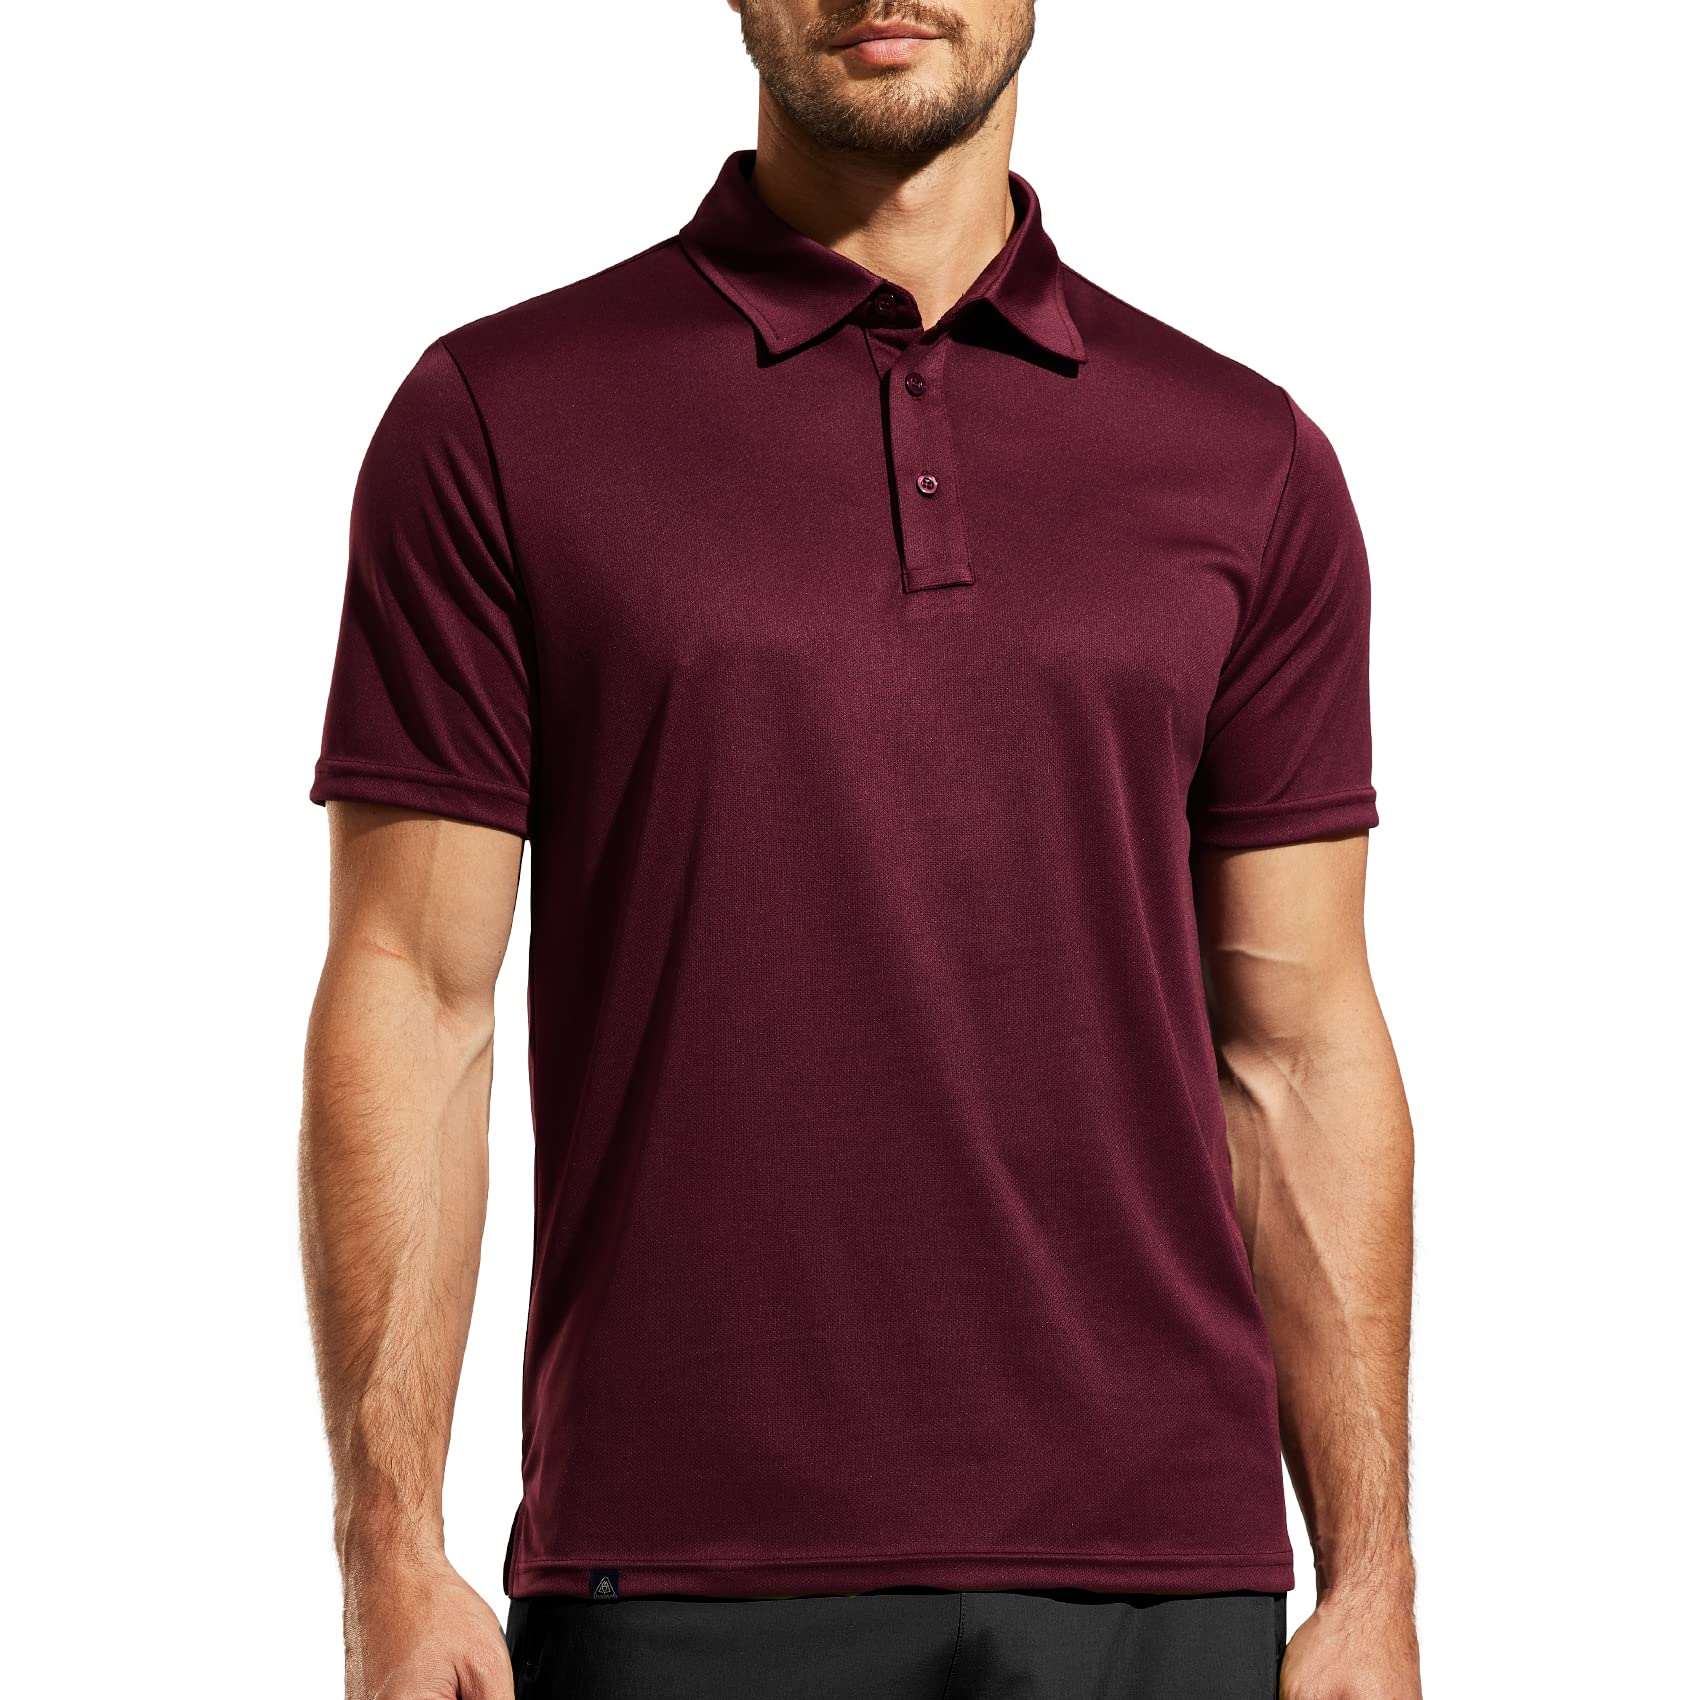 Polo Shirts for Men Dry Fit Short Sleeve Collared Golf Shirts